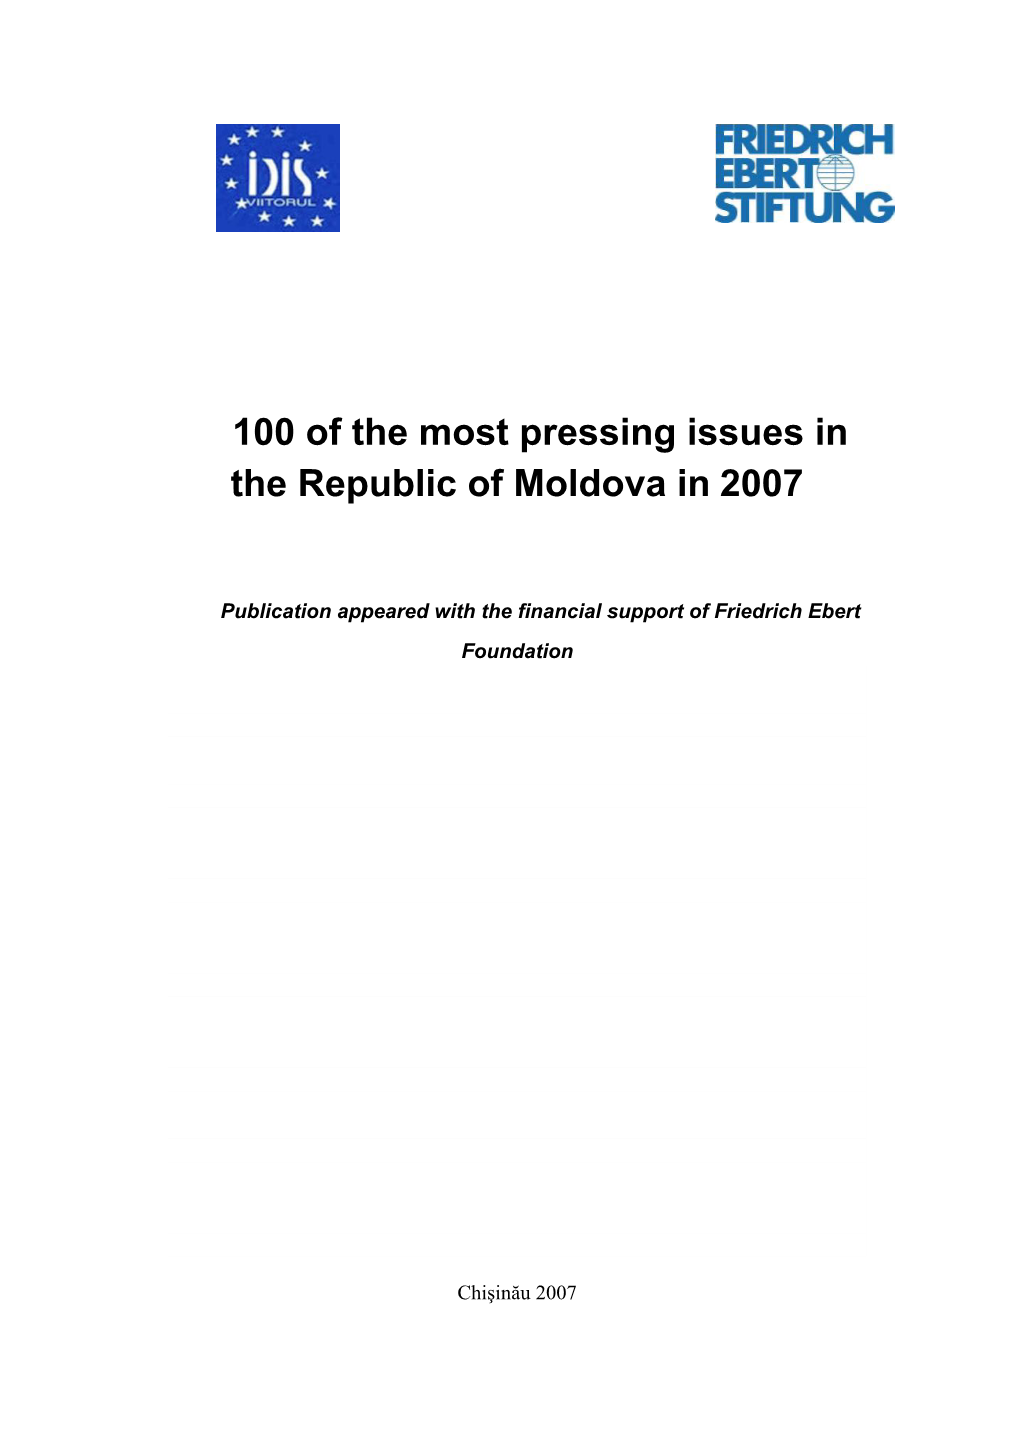 100 of the Most Pressing Issues in the Republic of Moldova in 2007